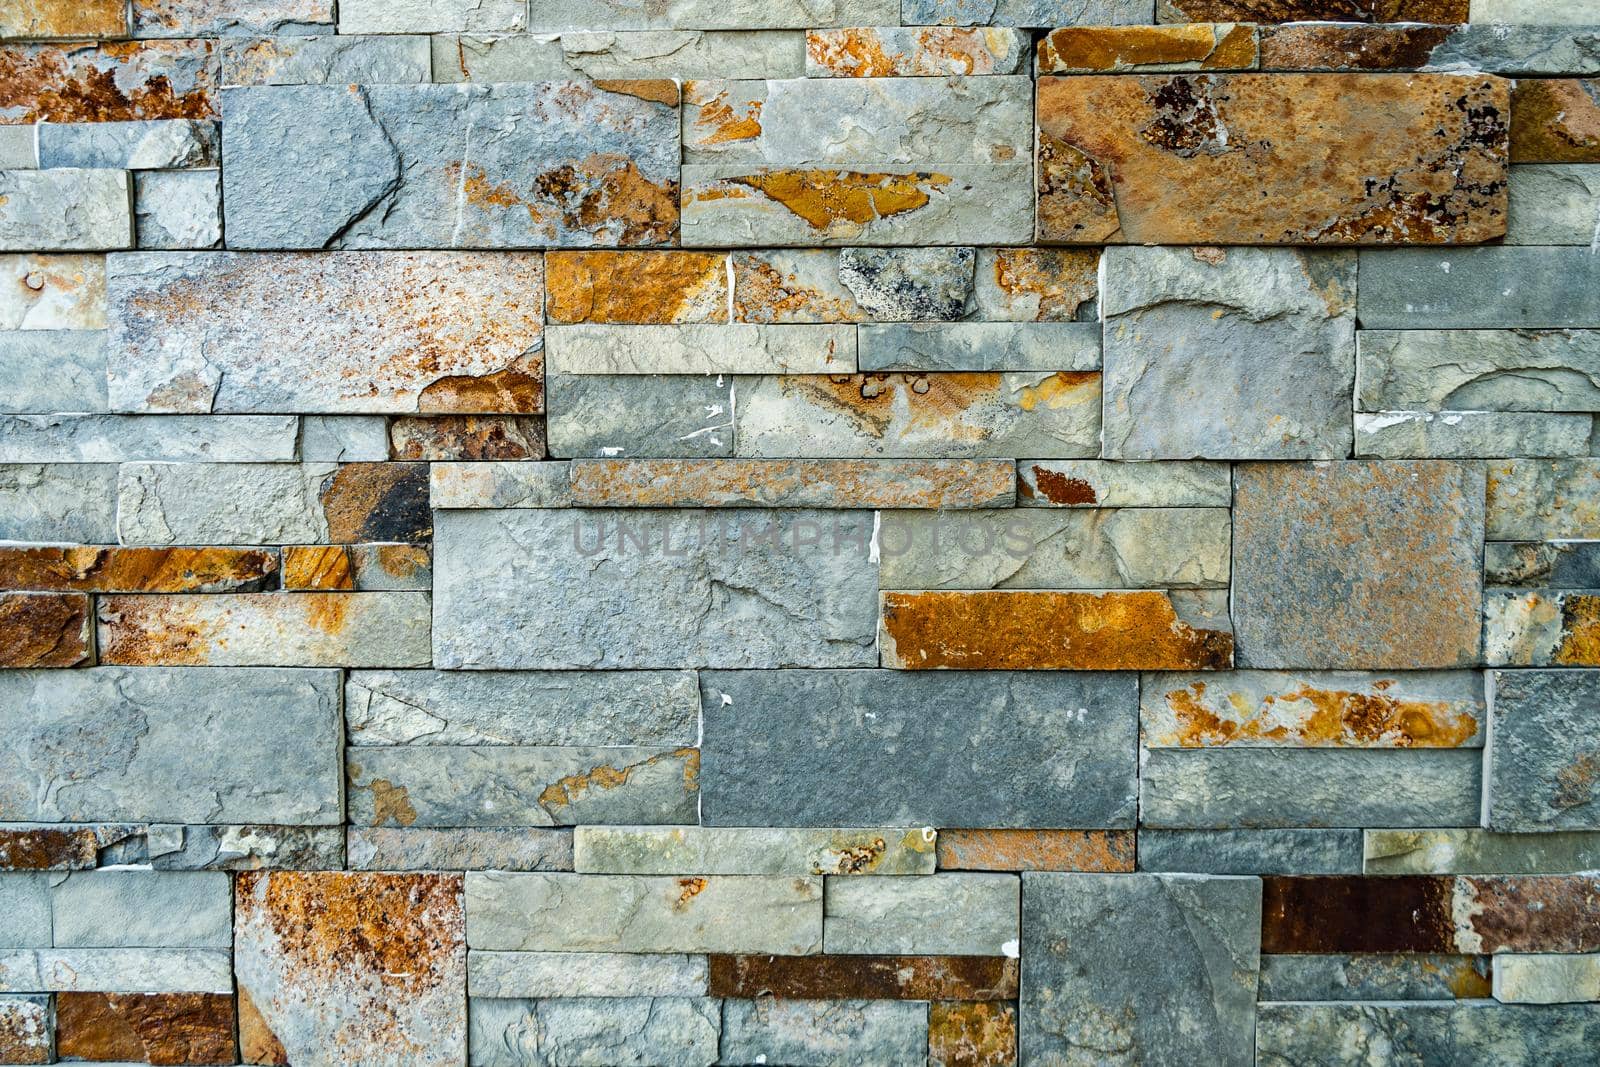 A Background arrangement of stones or slabs of different shapes and colors on a wall.